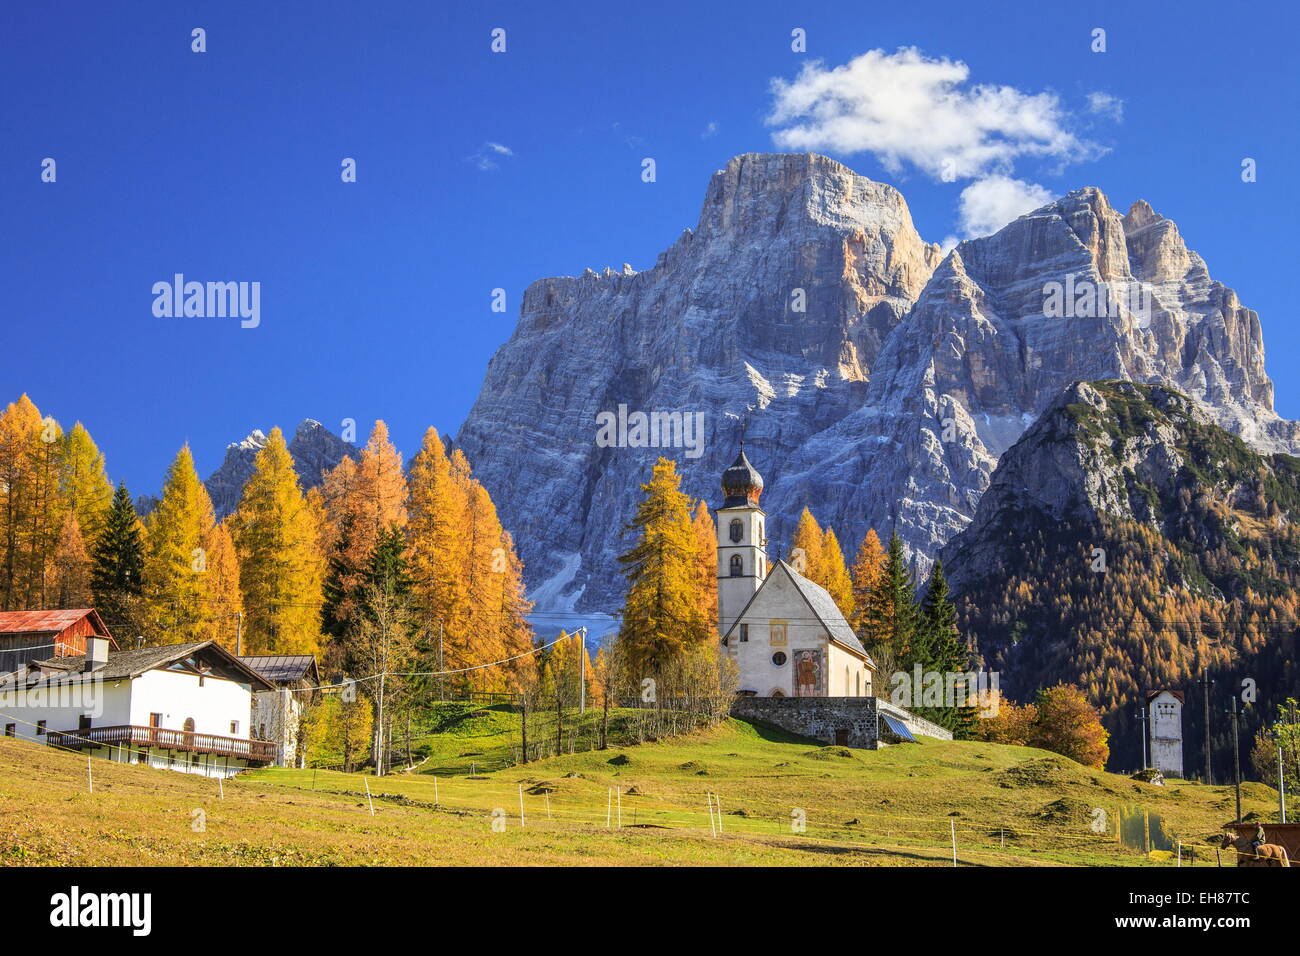 The tiny Church of Selva di Cadore, in the Dolomites, in autumn with the majestic Monte Pelmo in the background, Veneto, Italy Stock Photo